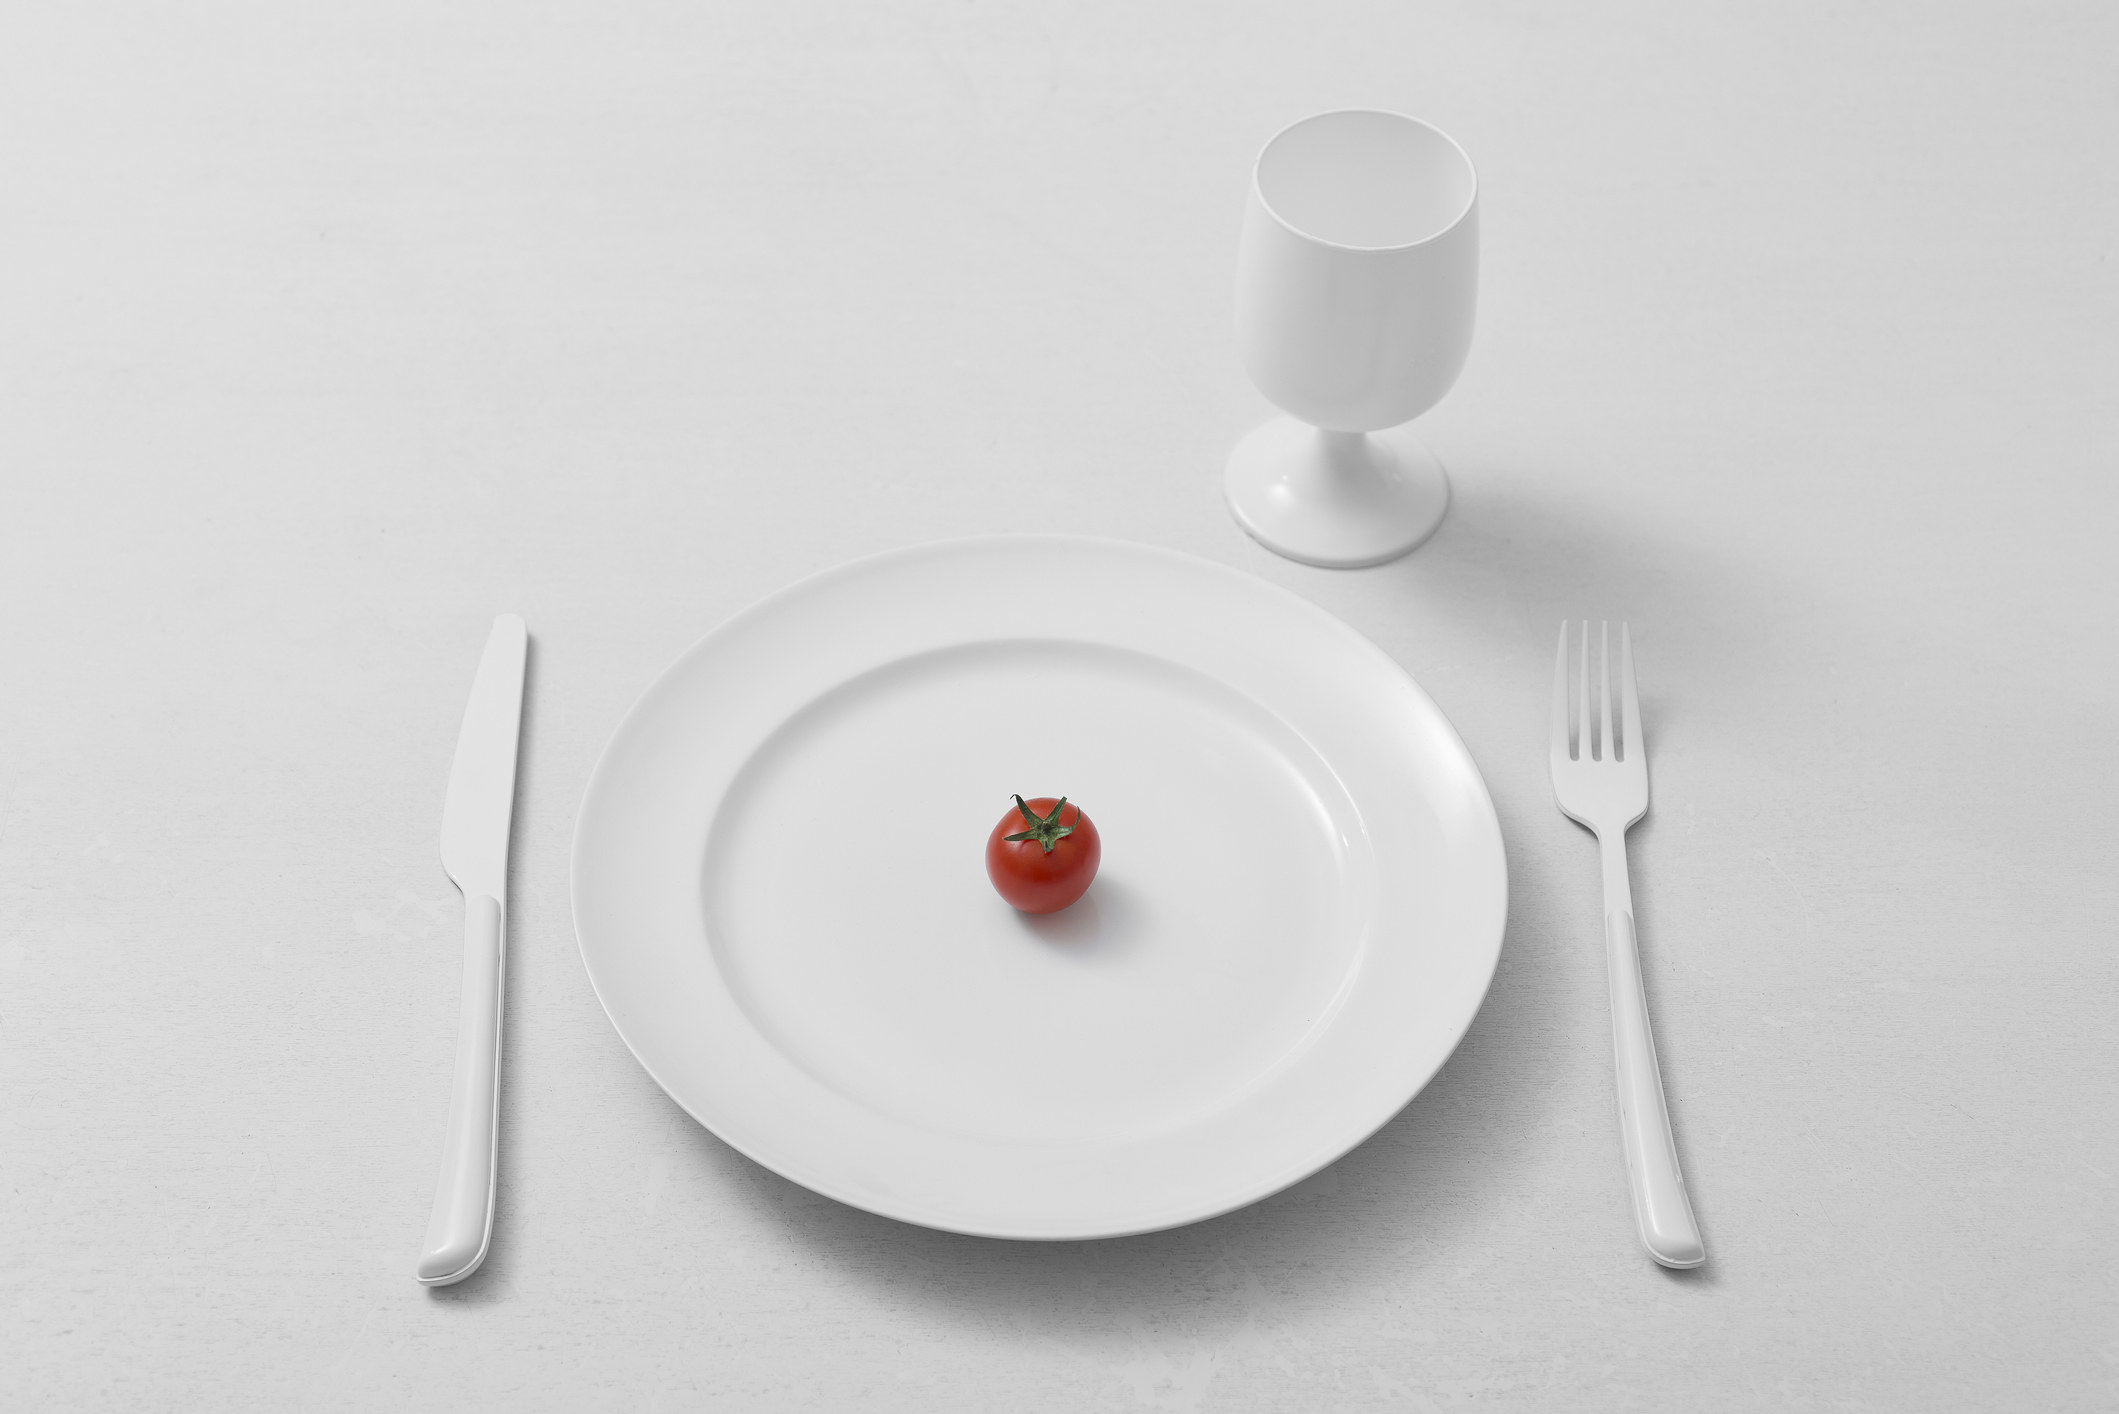 A plate with a single cherry tomato.